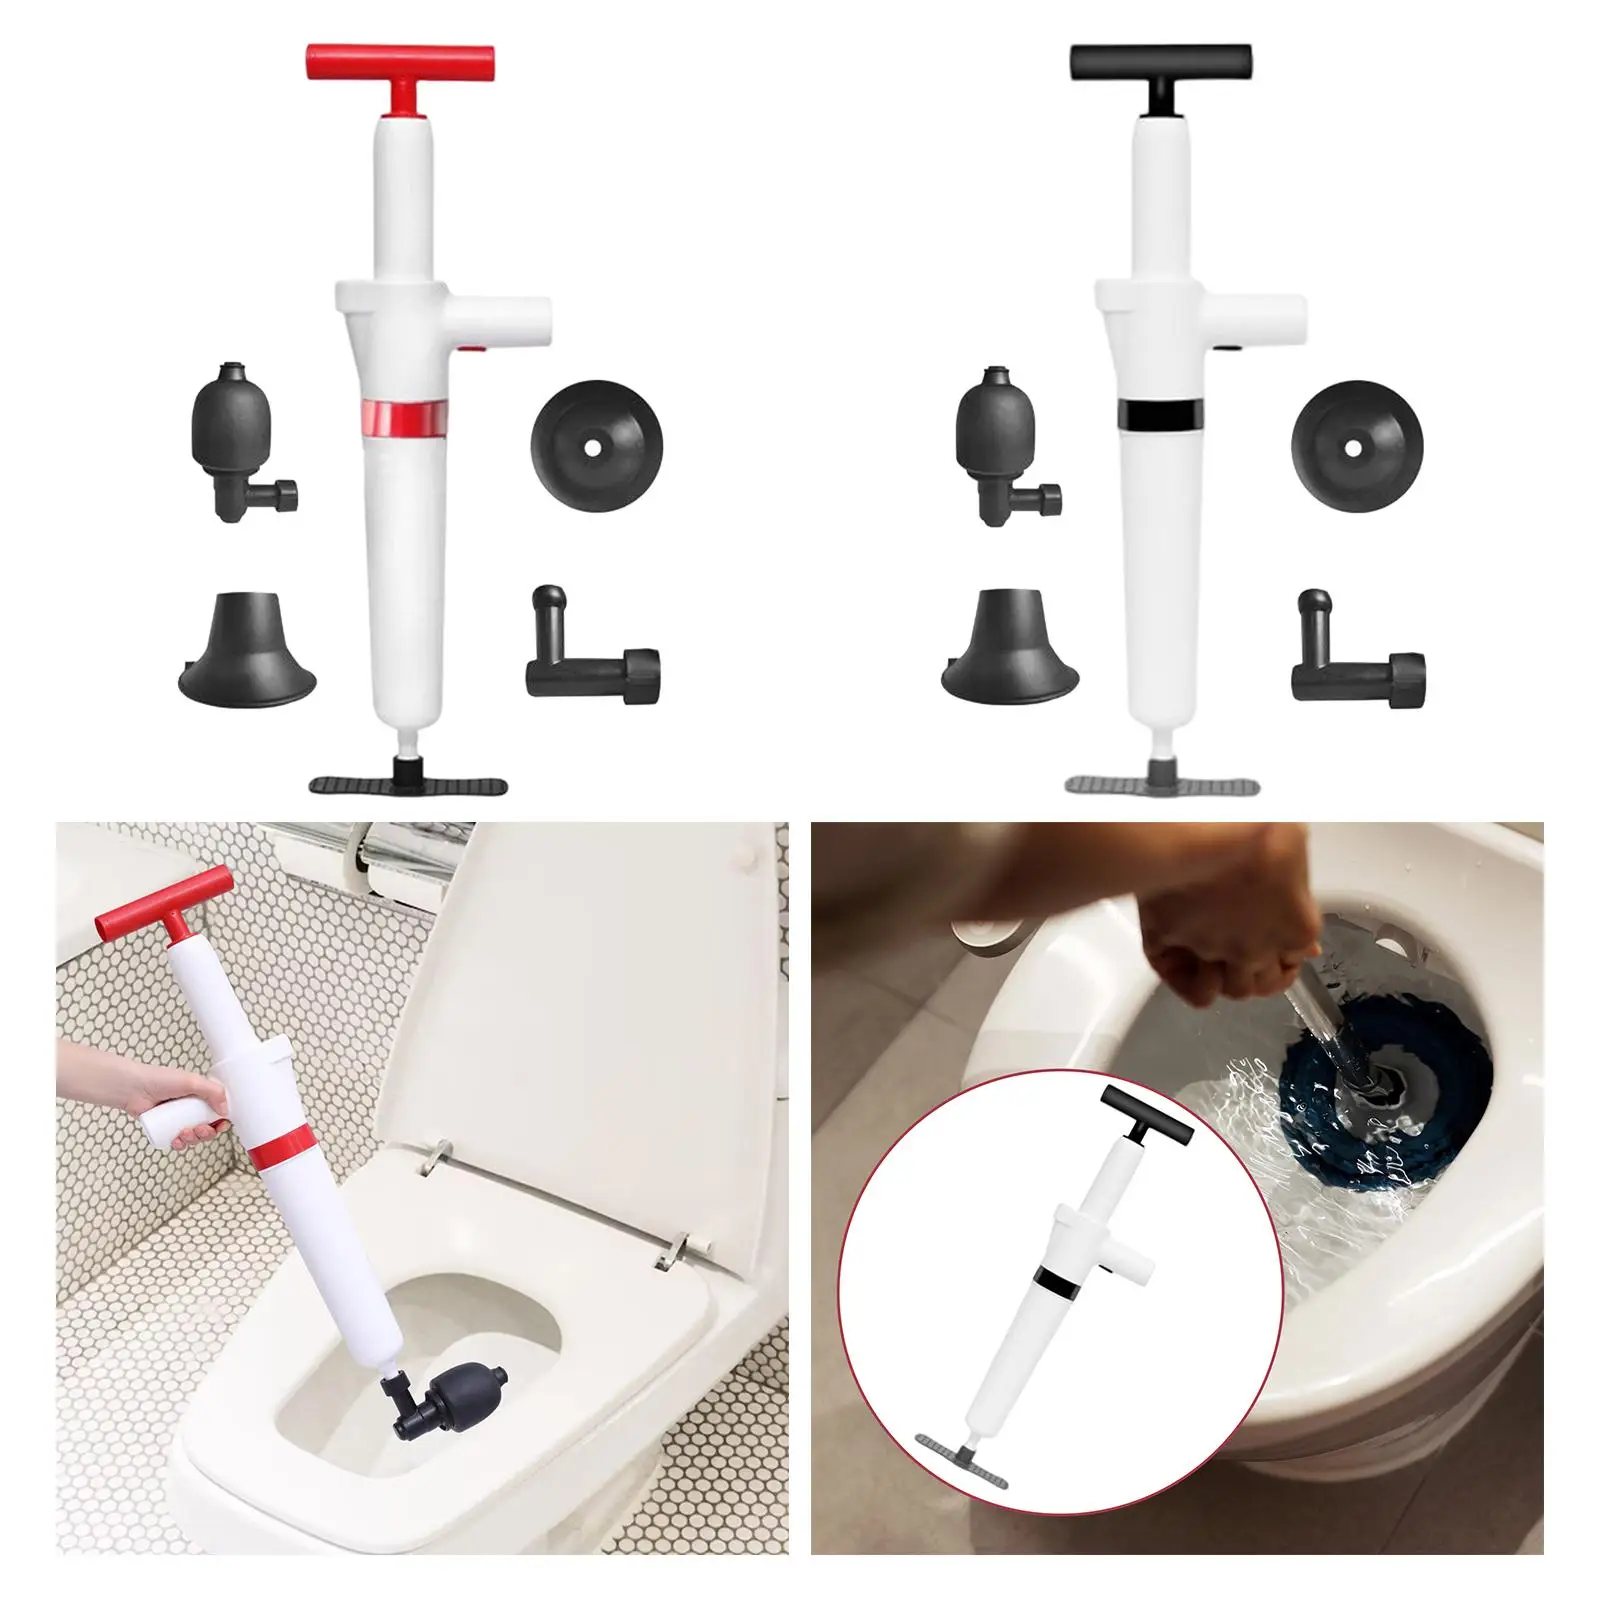 High Pressure Toilet Plunger Kit Air Drain Blaster Kit Clog Remover Plumbing Tools Air Toilet Unclogger for Kitchen Sink Home